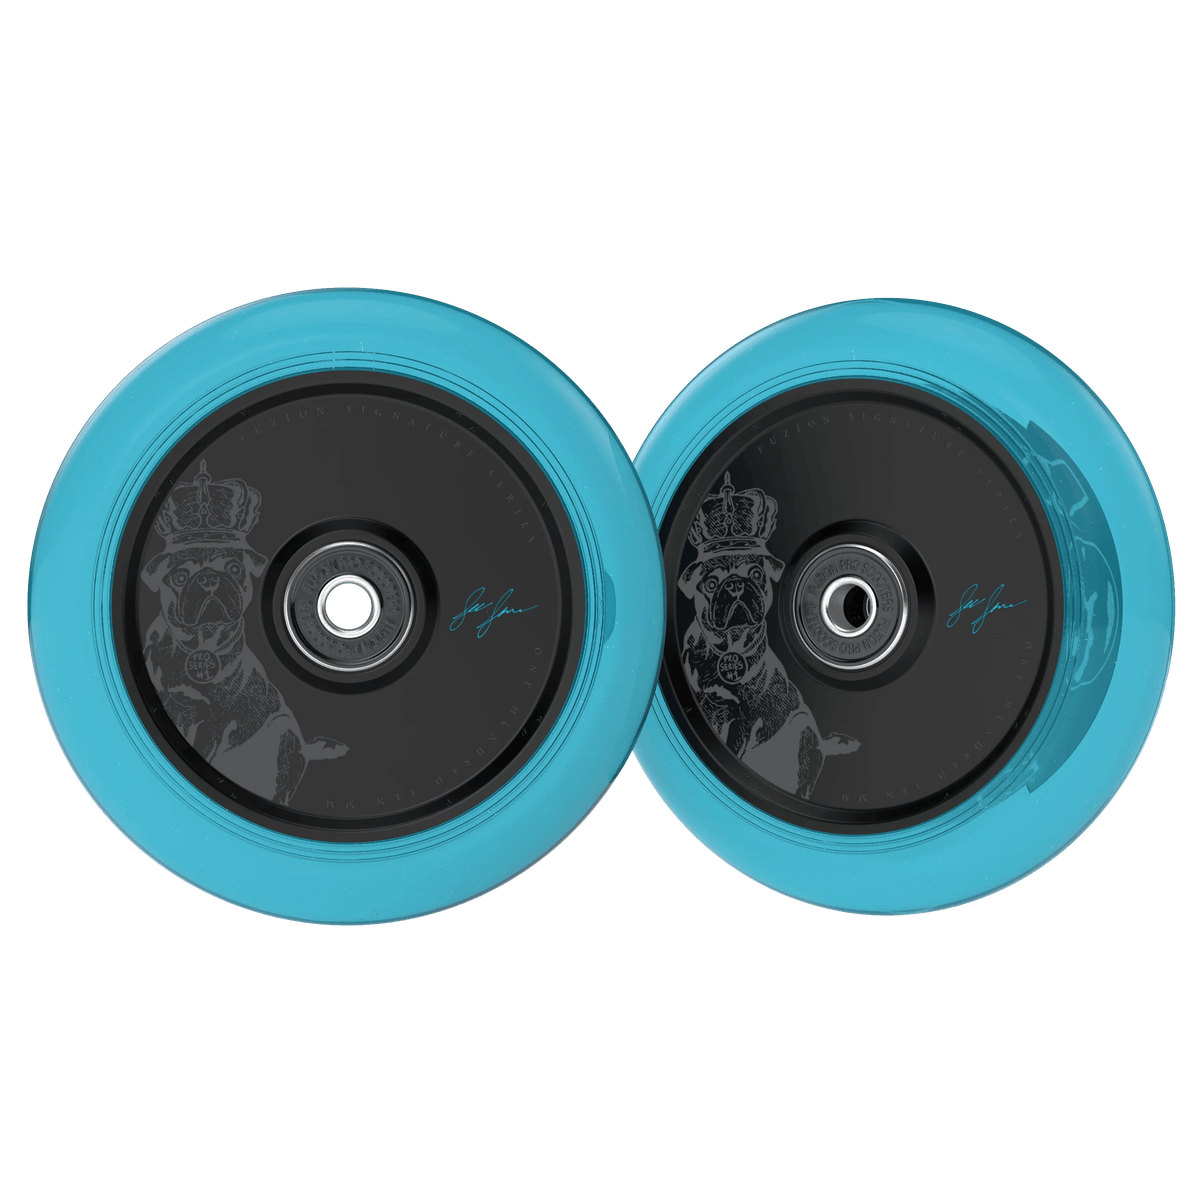 Fuzion Leo Spencer V2 Signature Wheels - Riding Scooters - Bland Pro Shop